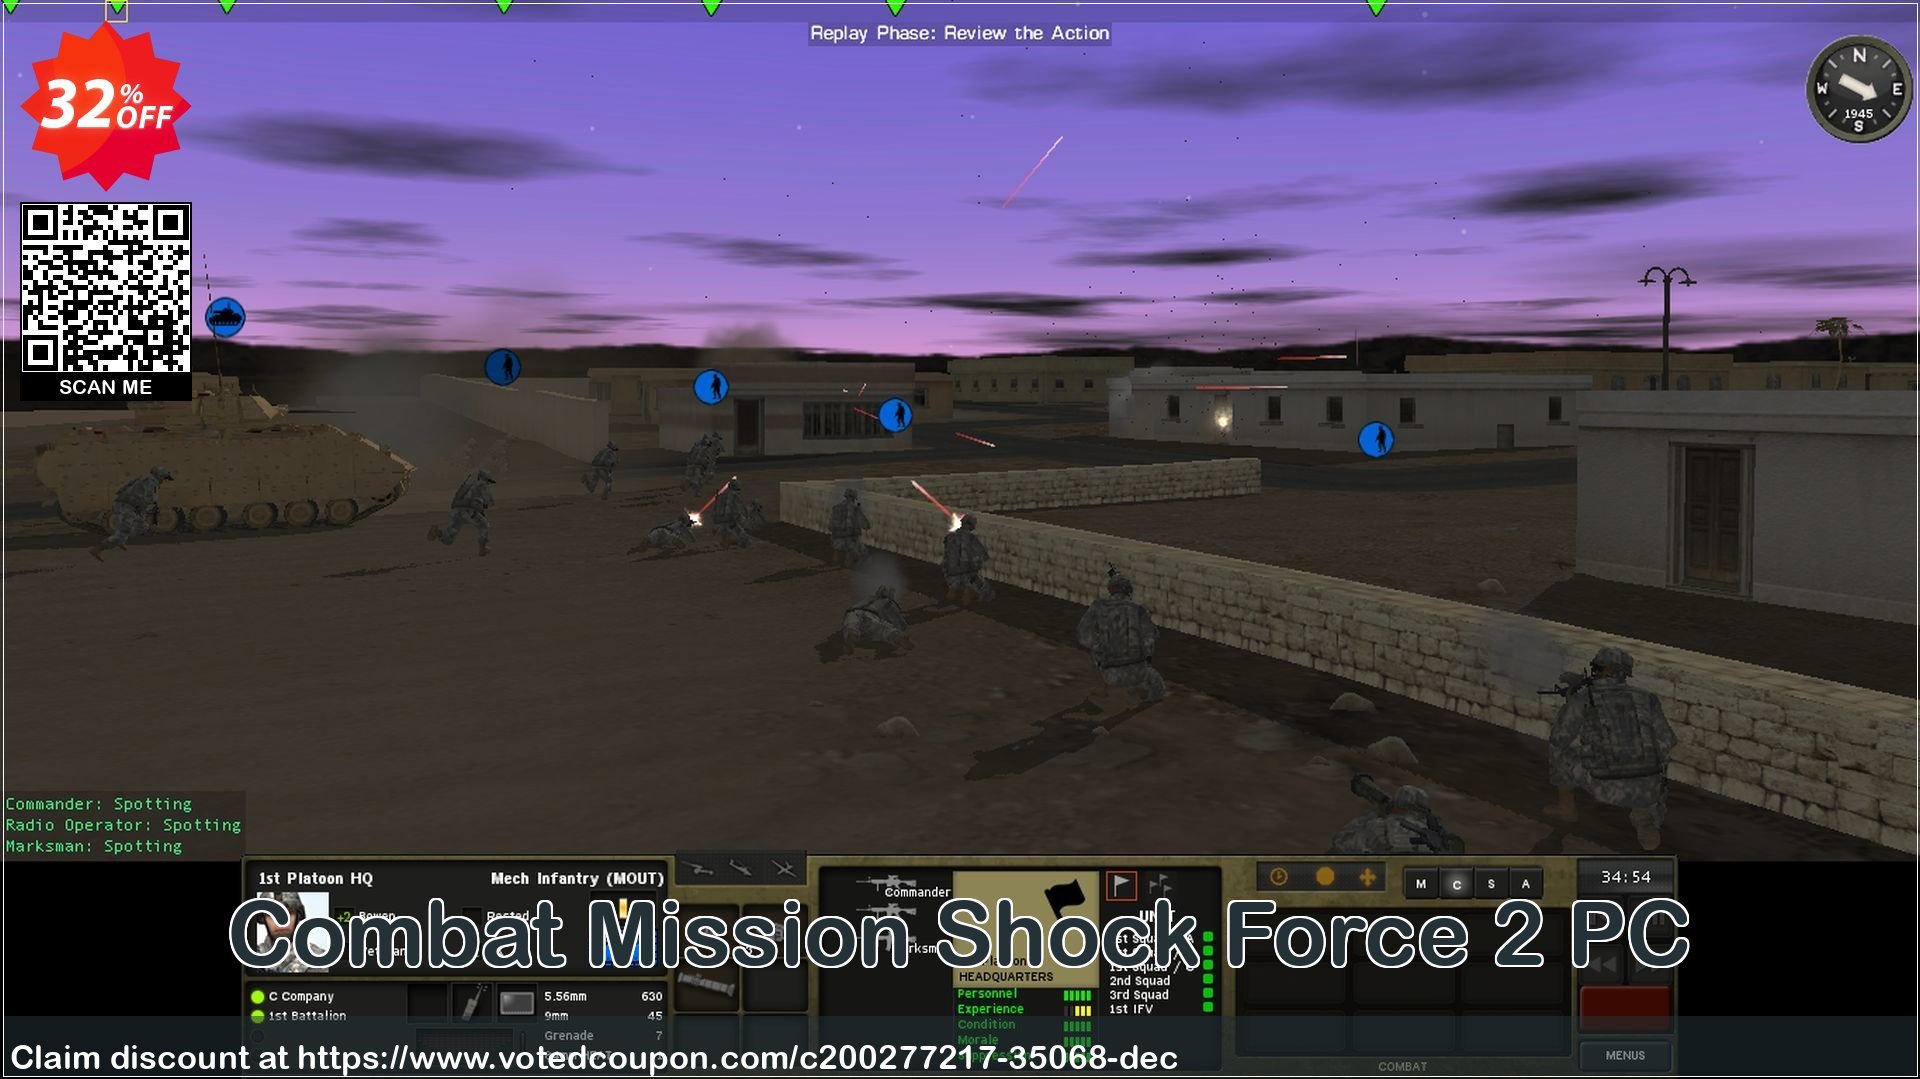 Combat Mission Shock Force 2 PC Coupon Code May 2024, 32% OFF - VotedCoupon